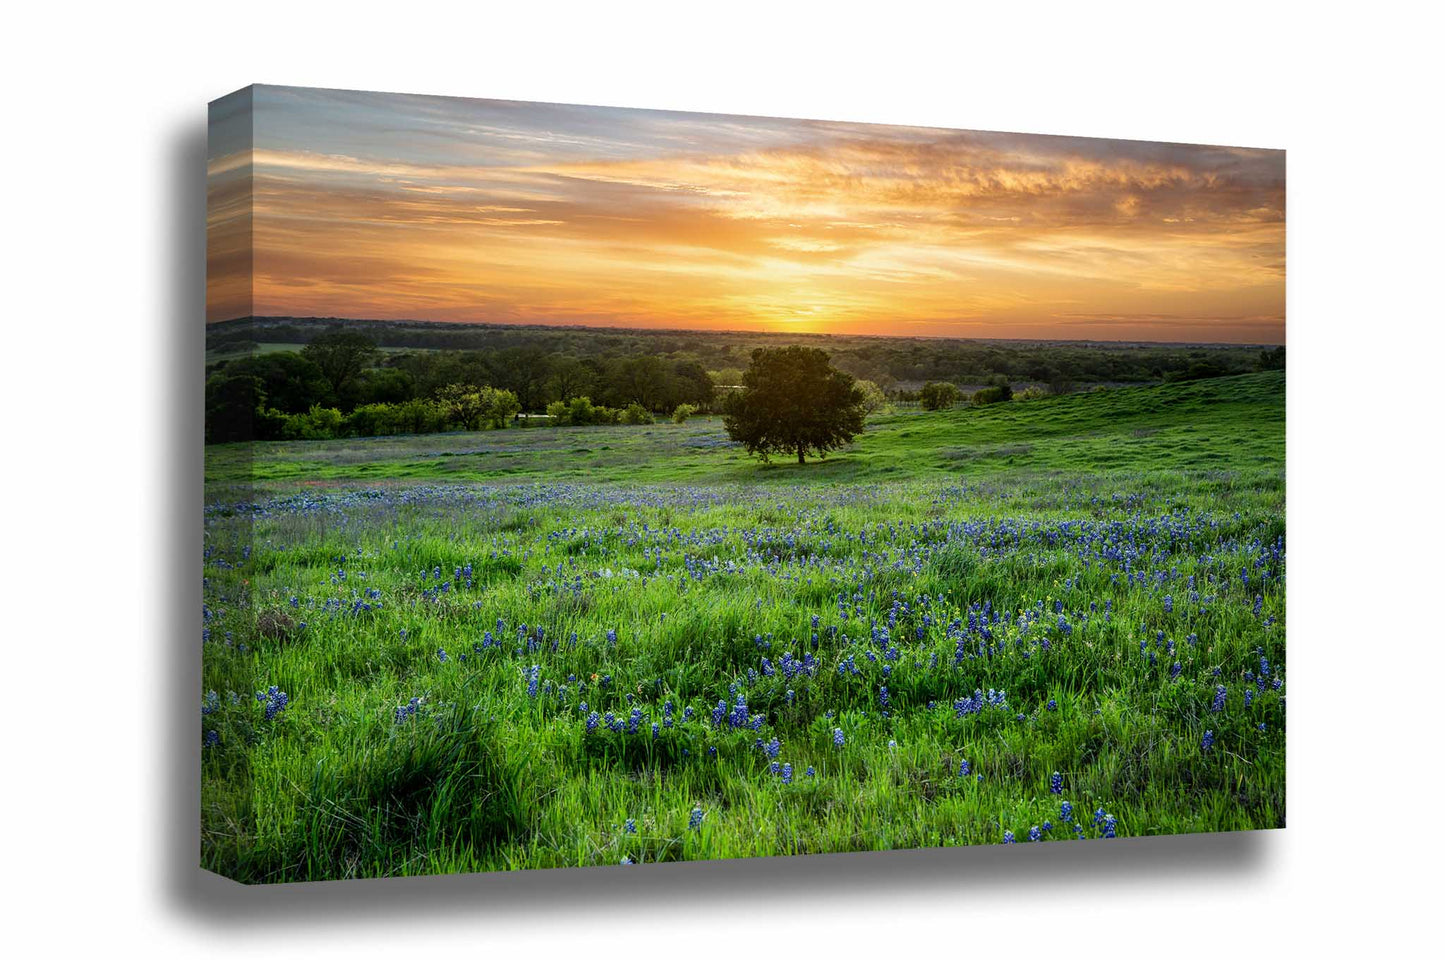 Canvas wall art of a lone tree in a field of bluebonnets at sunset on a spring evening in Texas by Sean Ramsey of Southern Plains Photography.